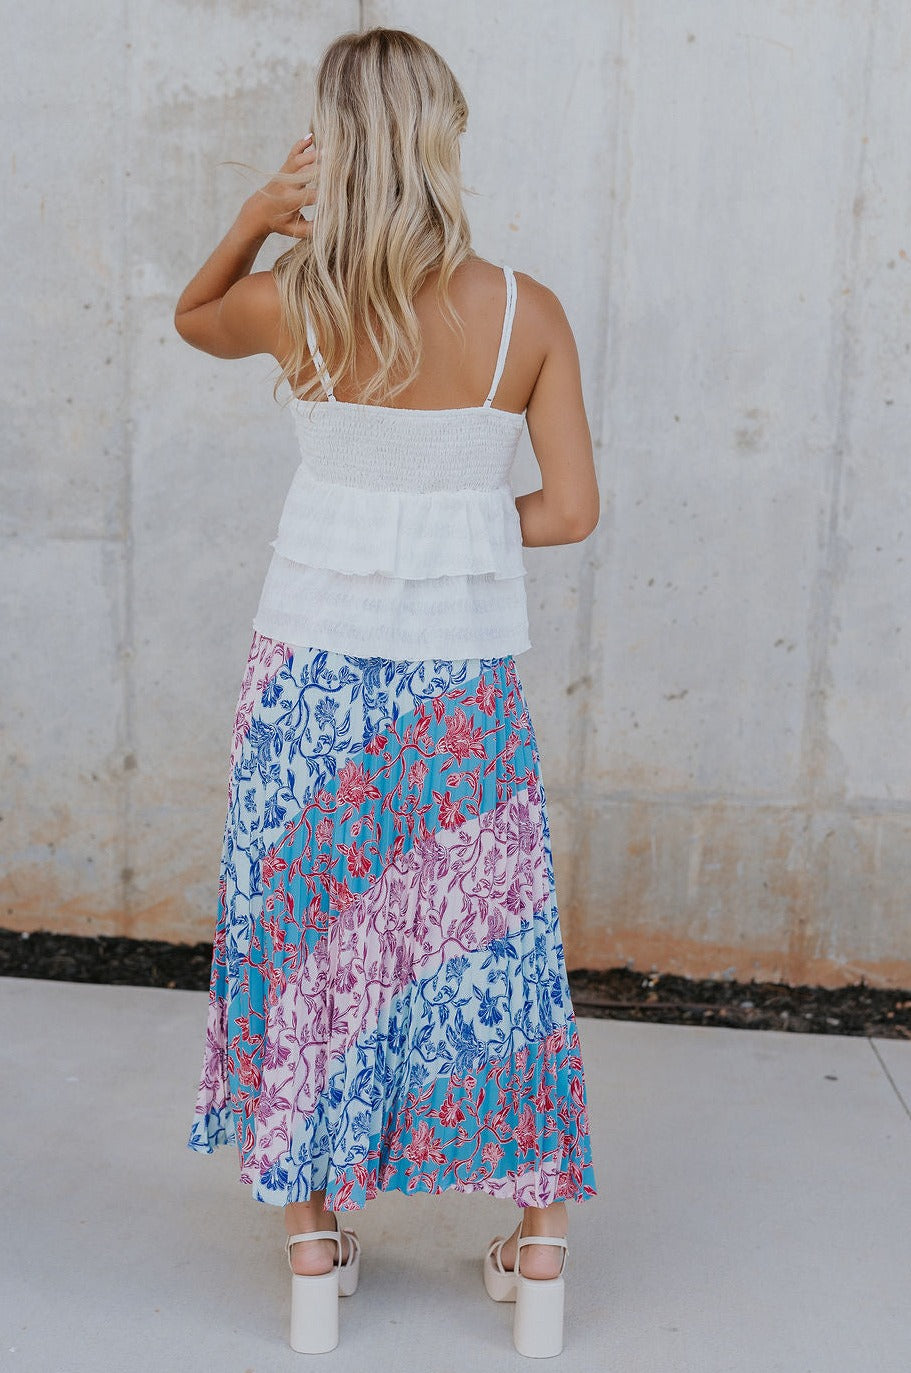 Back view of female model wearing the Lily Aqua & Pink Multi Pleated Maxi Skirt which features Blue, Pink, Red, Purple and Aqua Floral Print, Satin Pleated Fabric, Maxi Length, Light Blue Lining and Side Zipper with Hook Closure